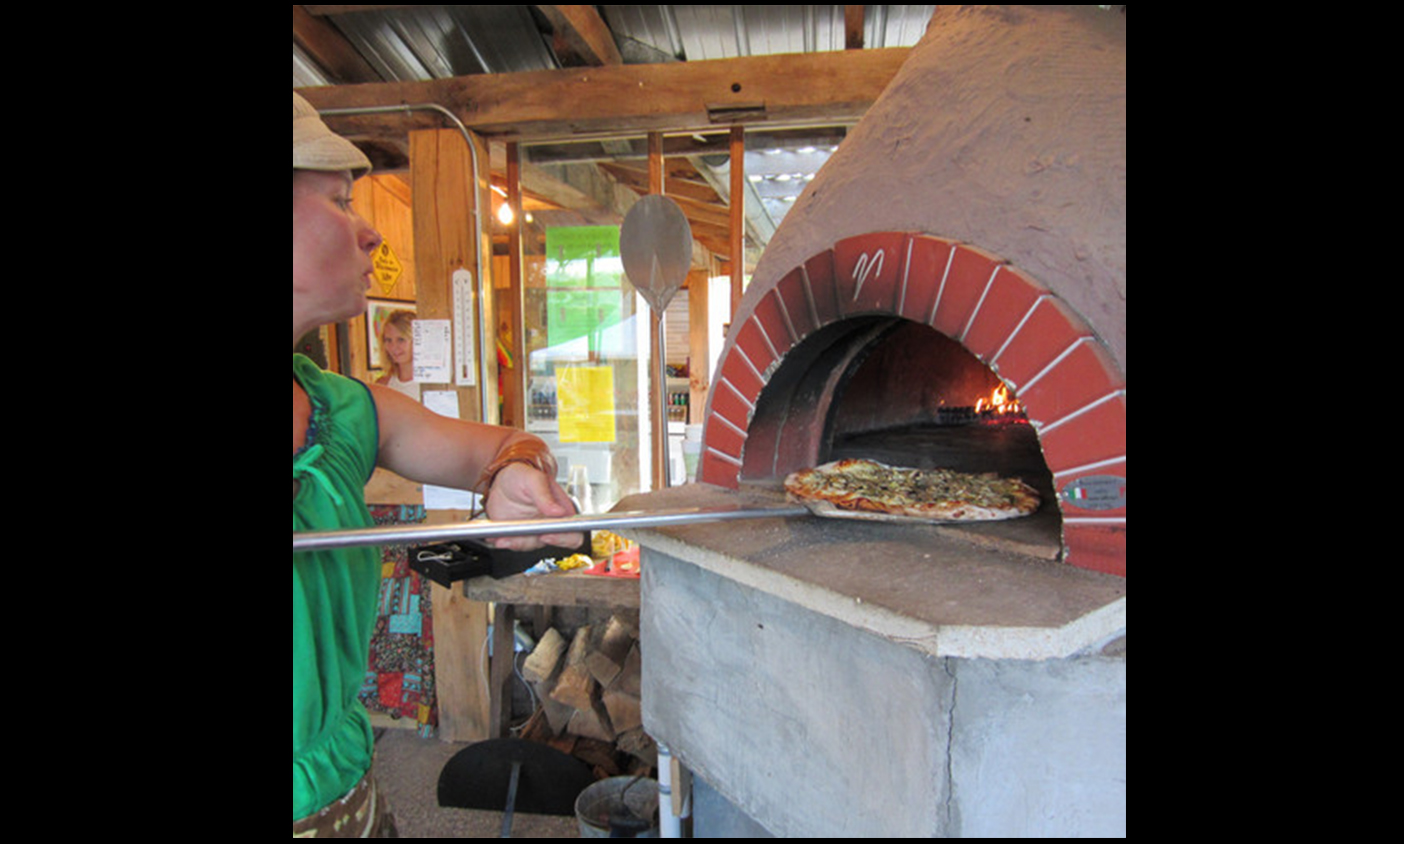 Heather Secrist of Suncrest Gardens Pizza Farm pulls a pizza from her oven. (Photo by Breann Schossow)